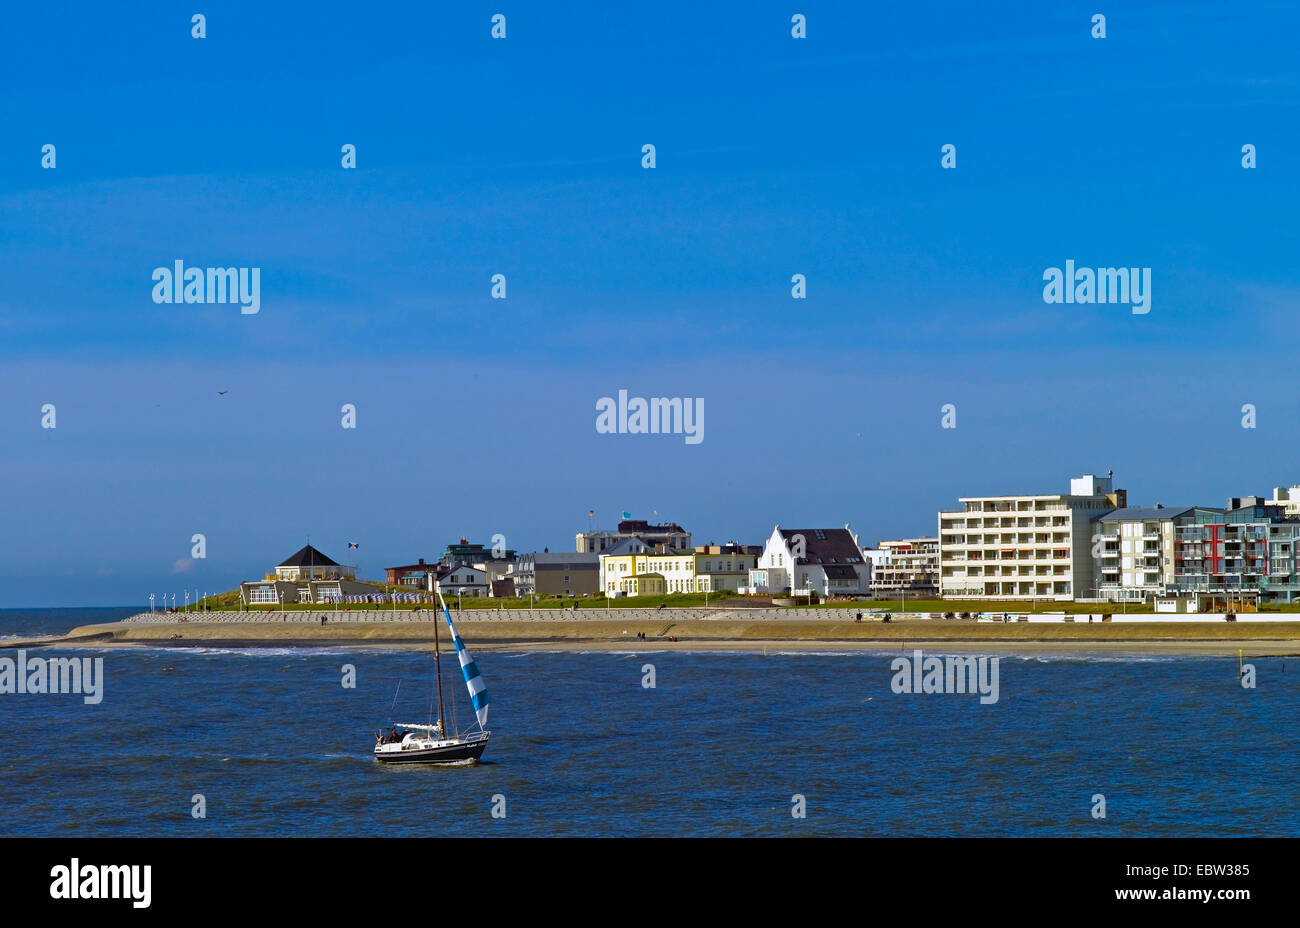 view from North Sea to Norderney, Germany, Lower Saxony, Norderney Stock Photo